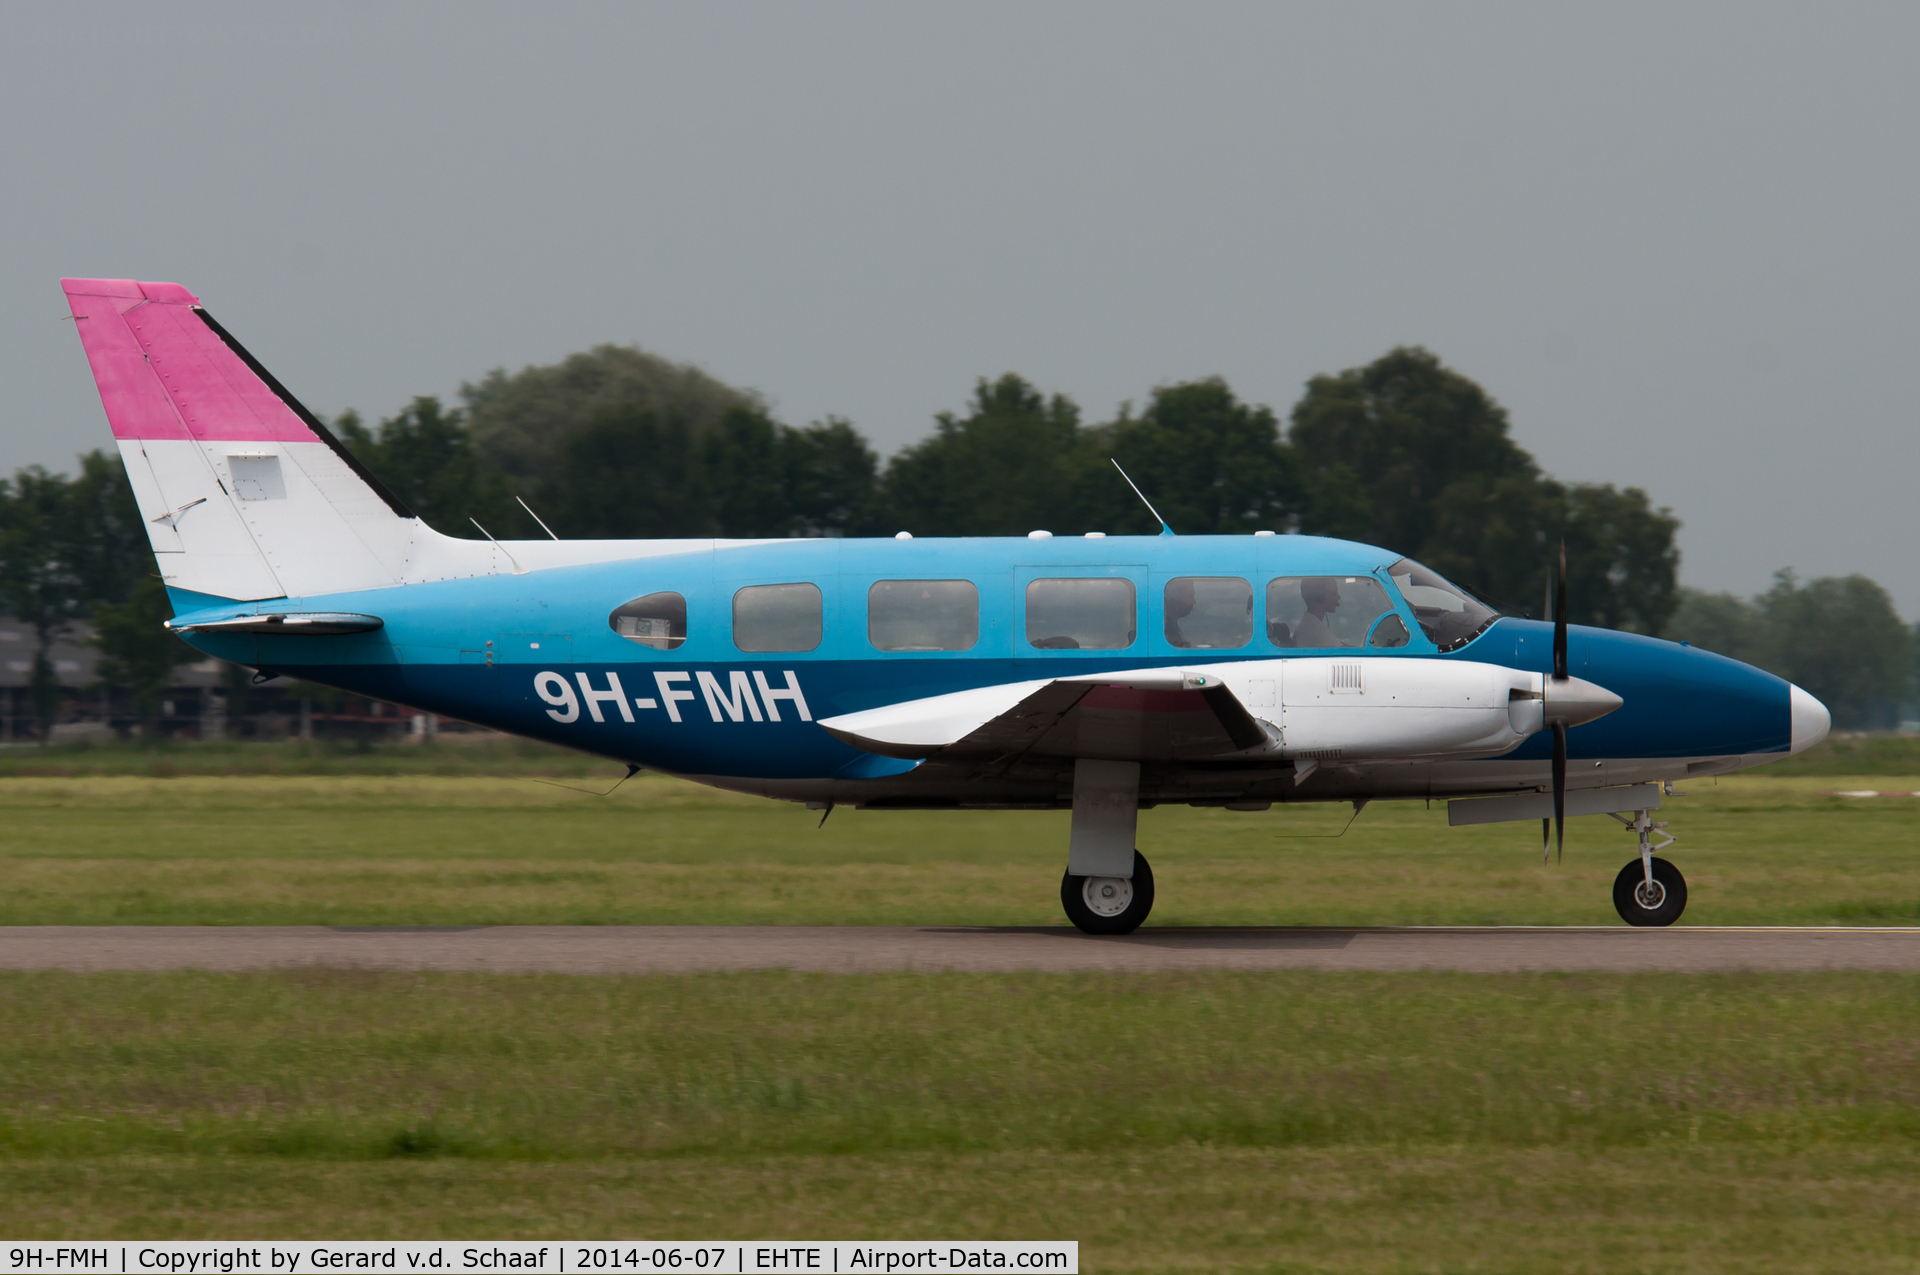 9H-FMH, 1975 Piper PA-31-350 Navajo Chieftain Chieftain C/N 31-7552075, Teuge, June 2014